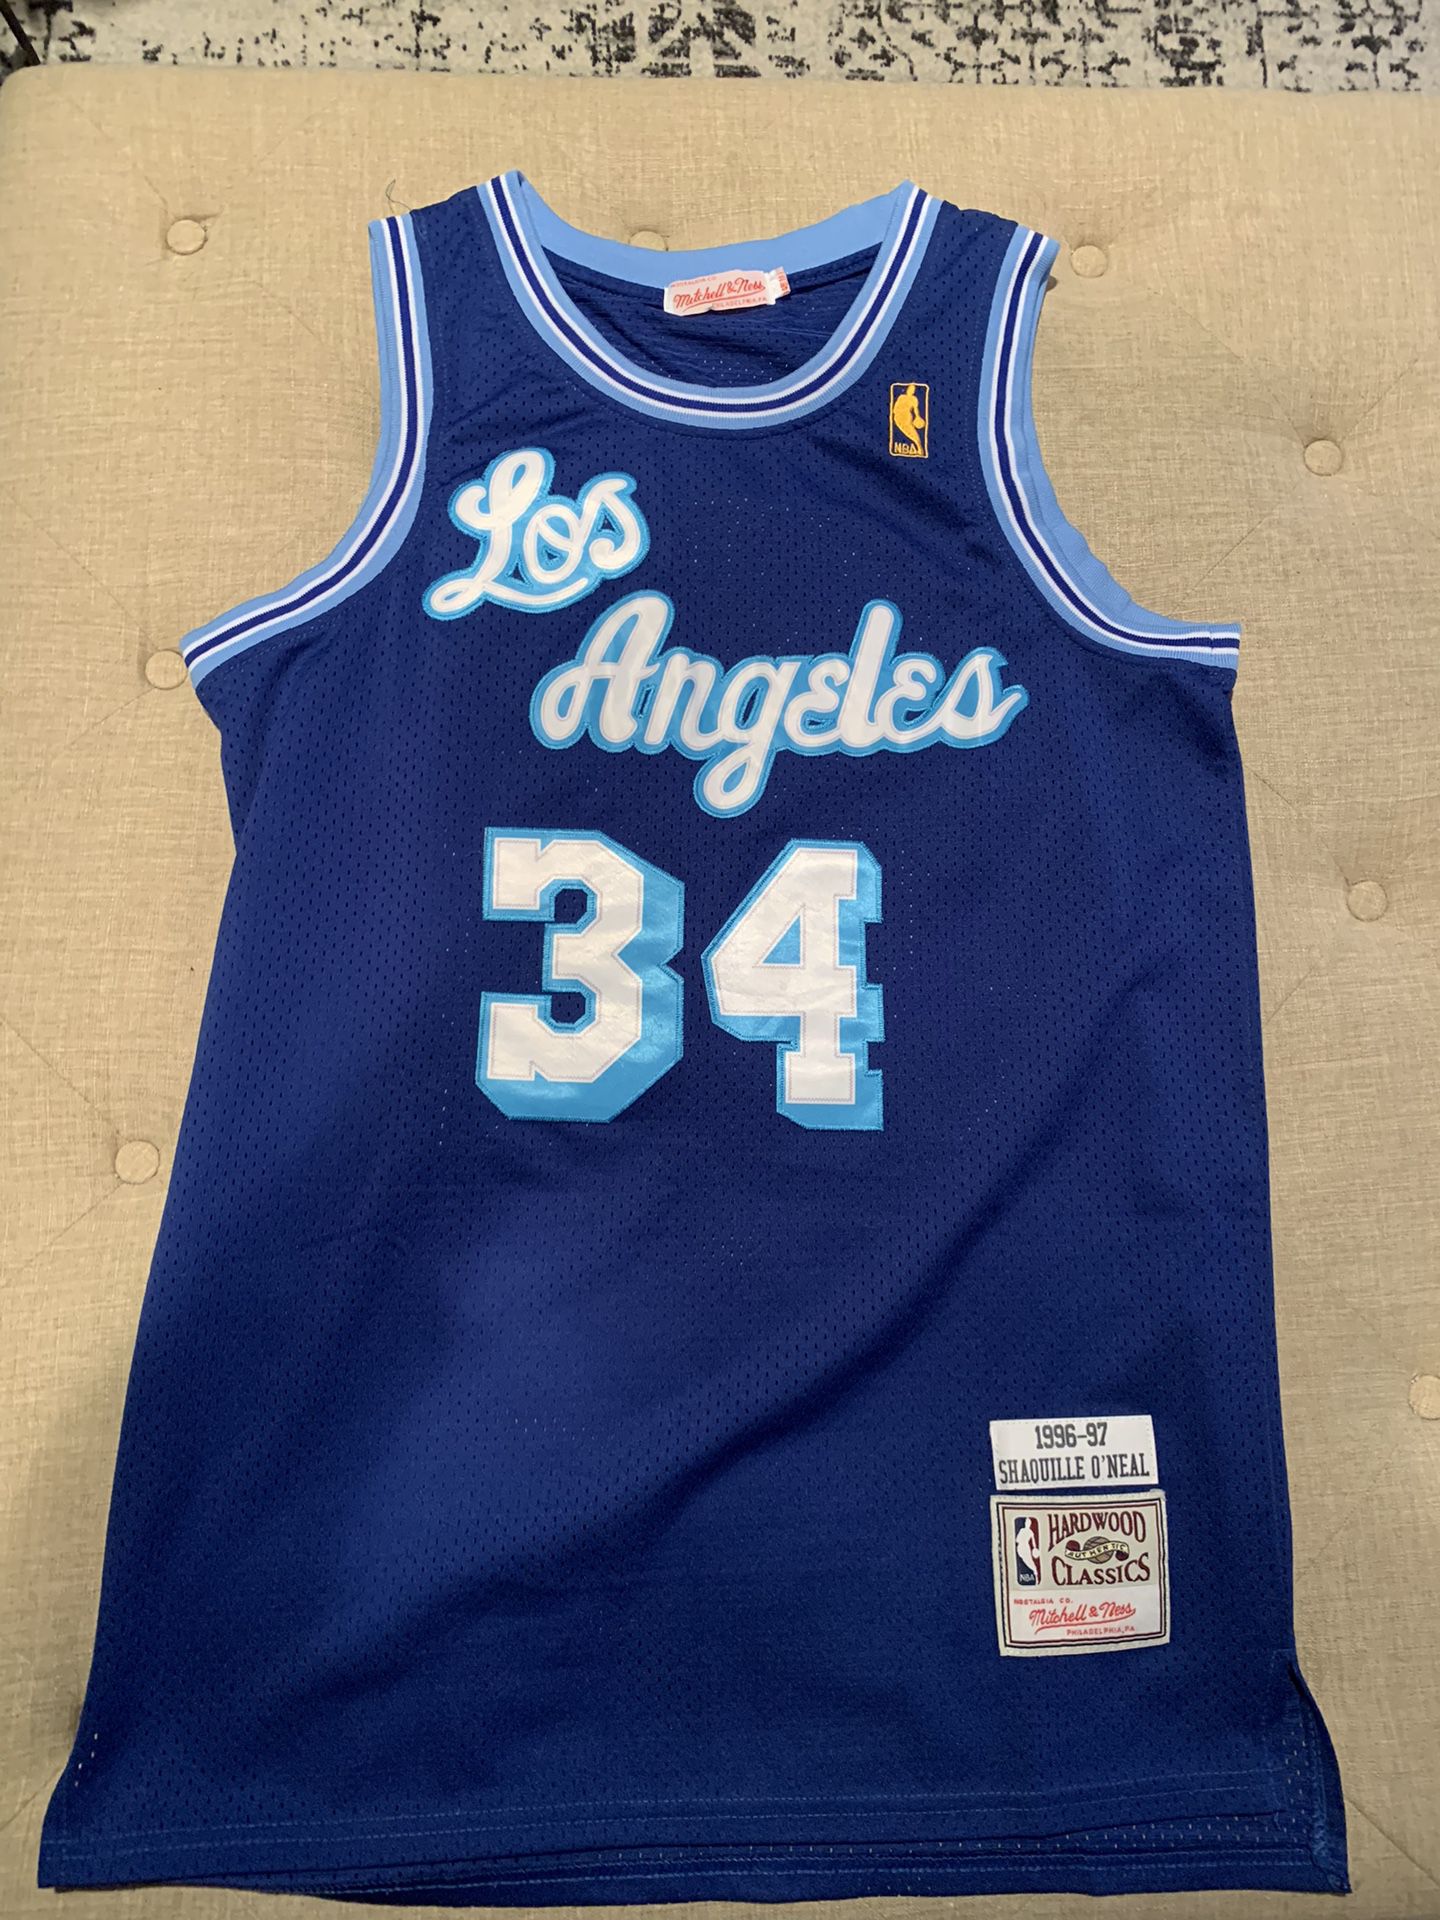 Shaquille O’Neal Jersey 